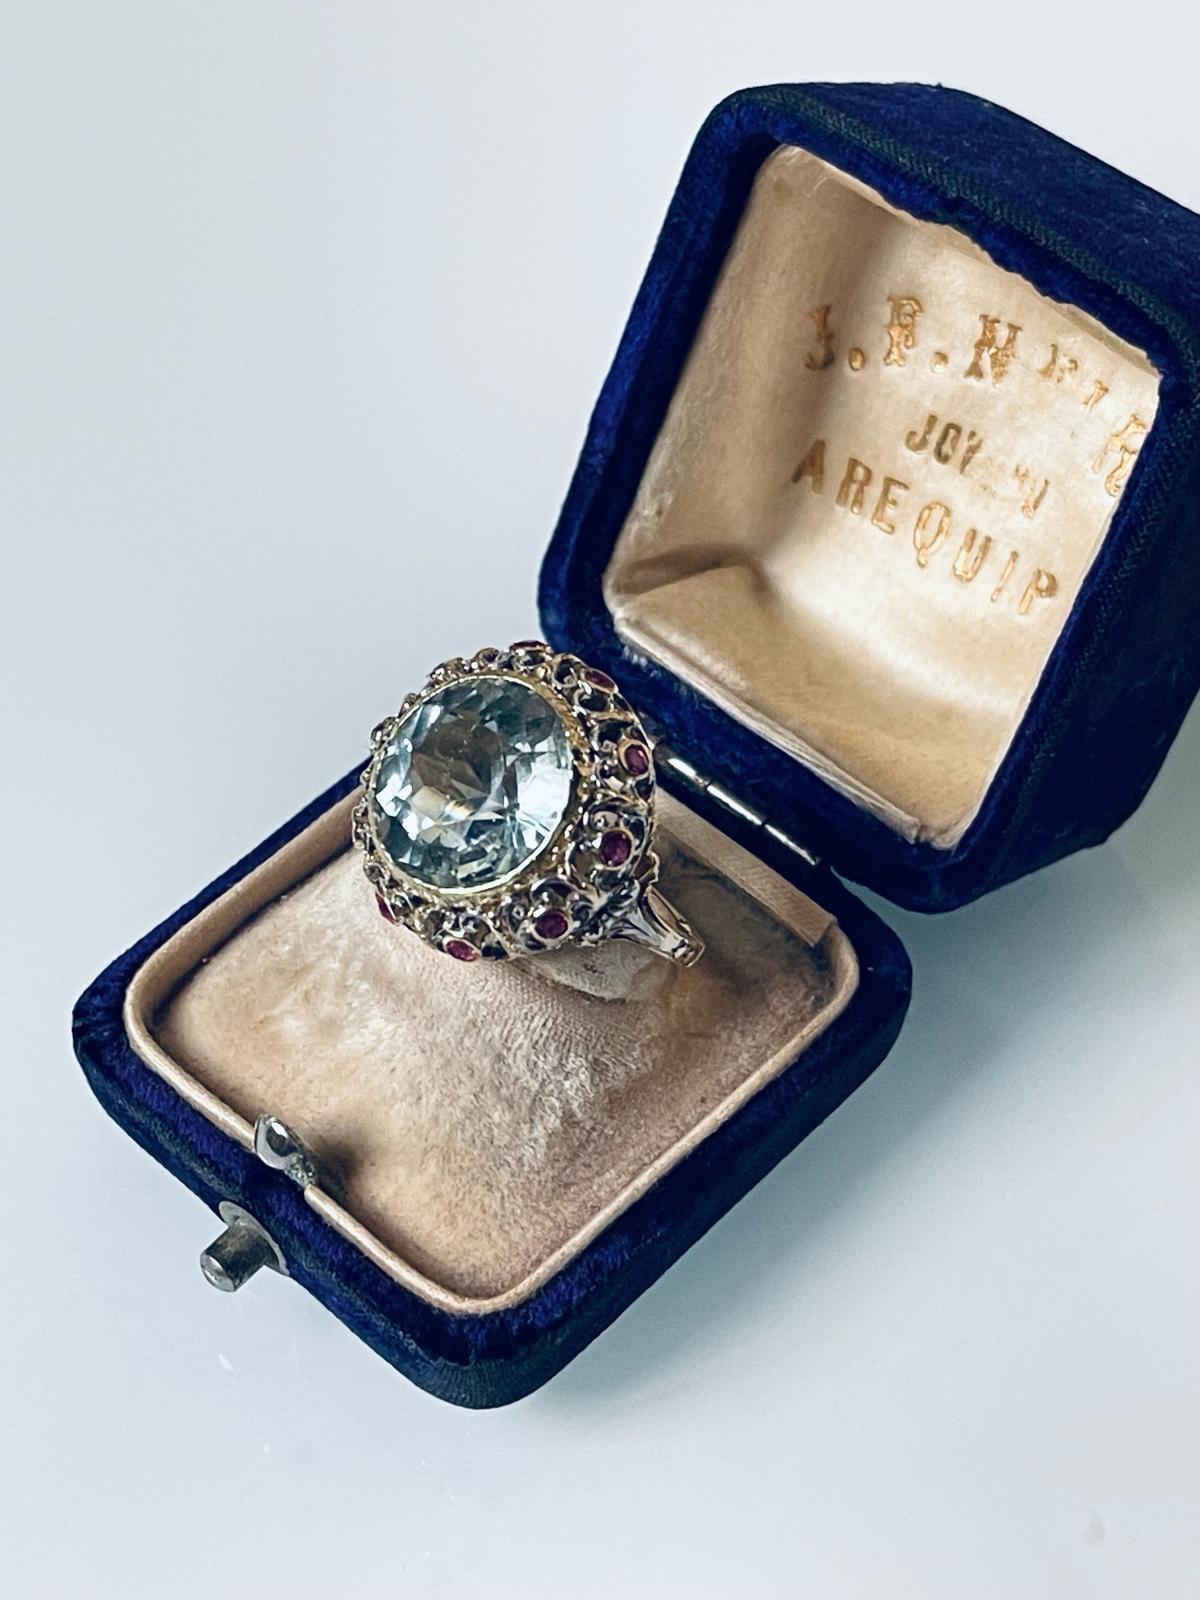 An early 20th C Italian ring, finely hand made in Florentine goldsmith tradition (starting in 16th C) distinguished for its refined fretwork (perforation) and engraving. 

This nice example of Florentine jewellery art is set with a large round cut